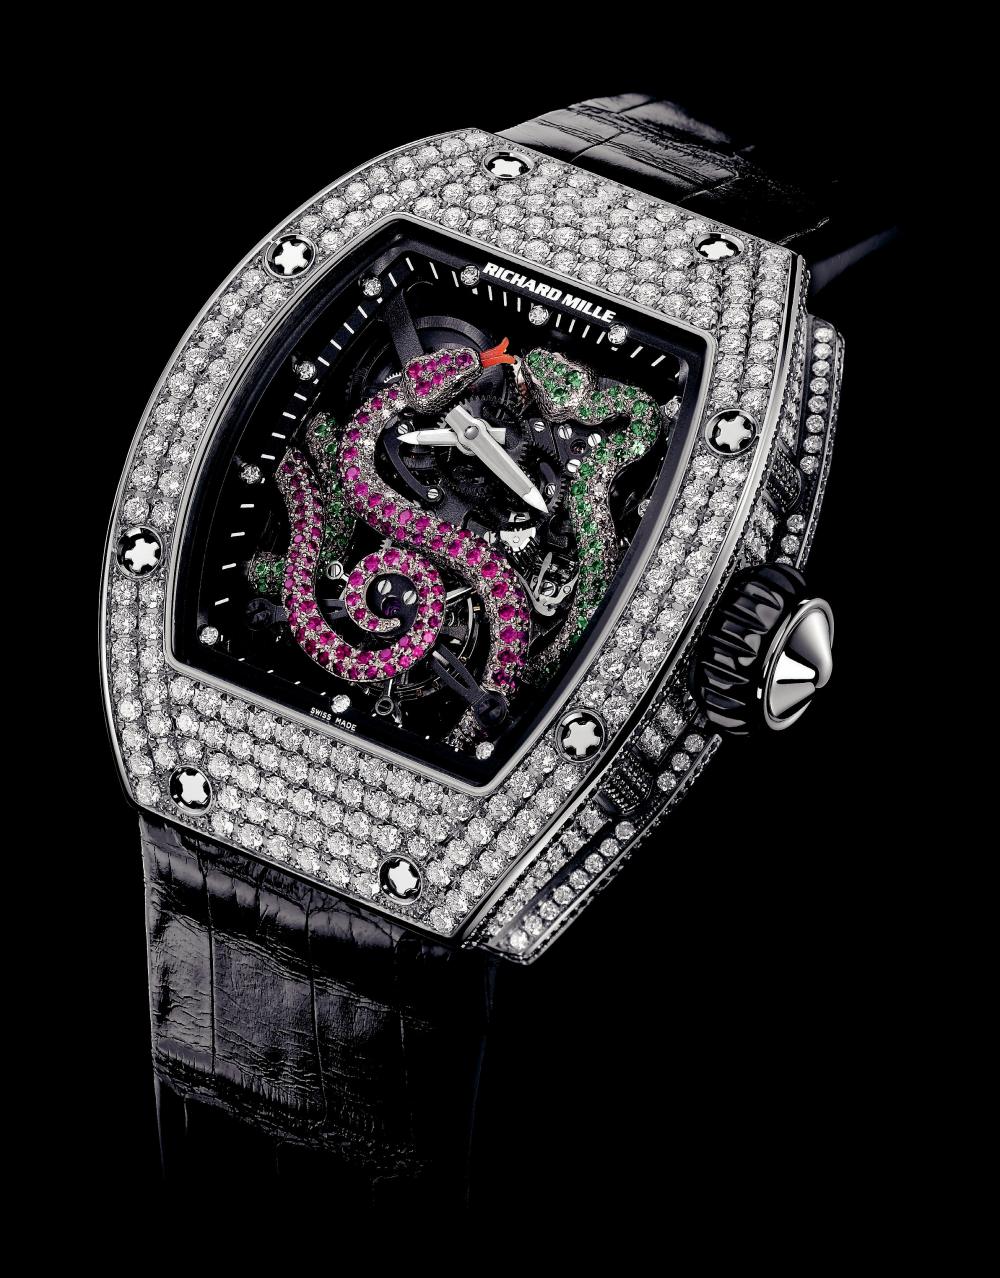 Richard Mille RM 026 Replica Watches